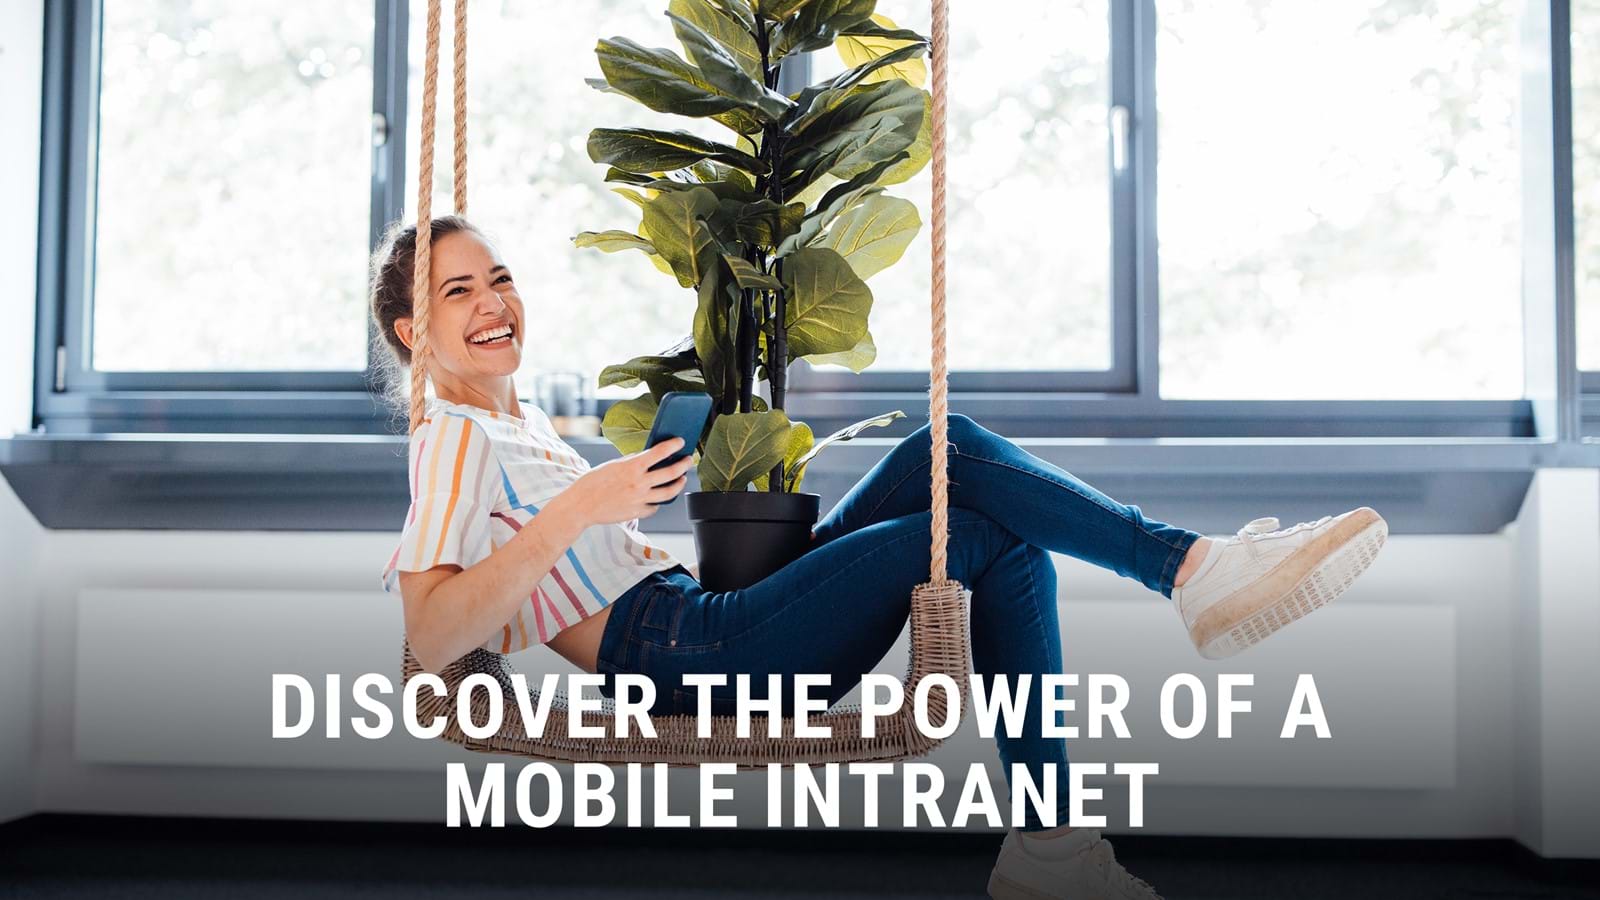 'Discover the power of a mobile intranet' - Unily guide front cover